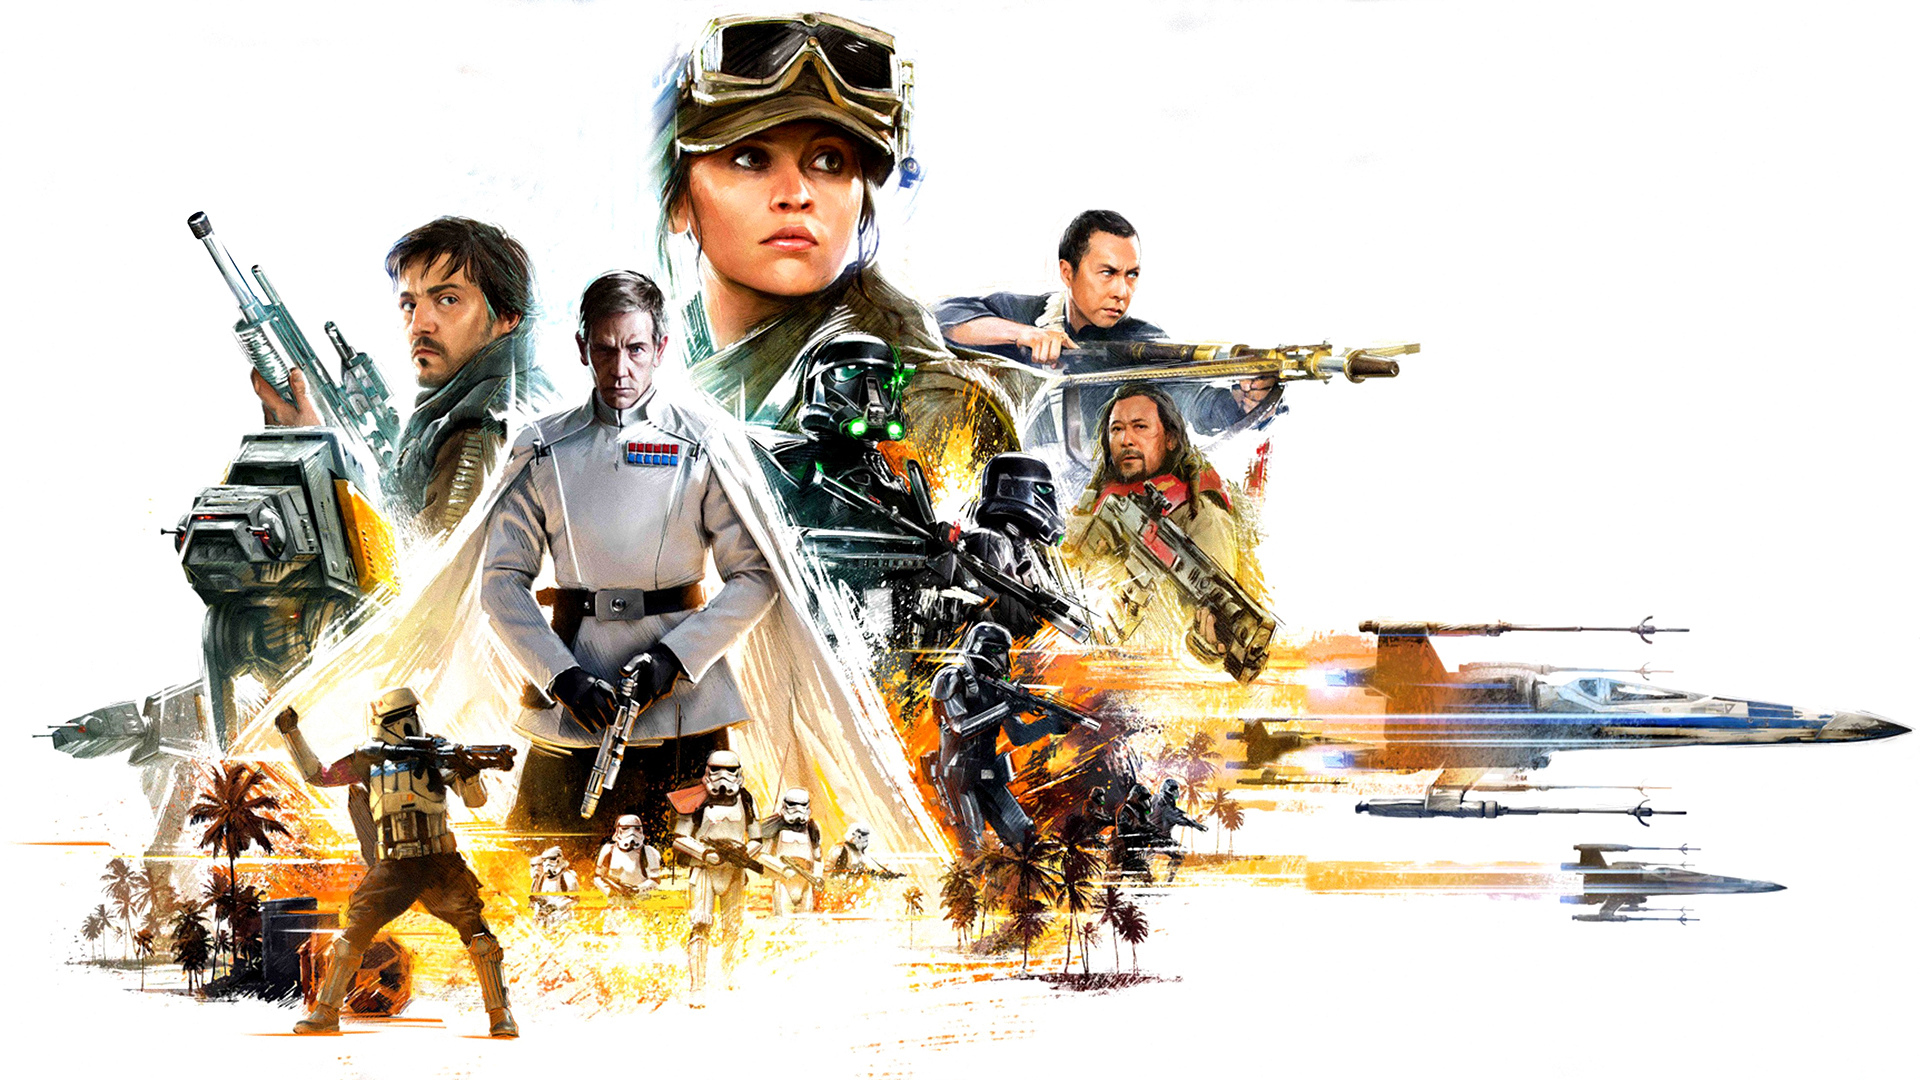 rogue one wallpaper hd,movie,soldier,poster,games,action film